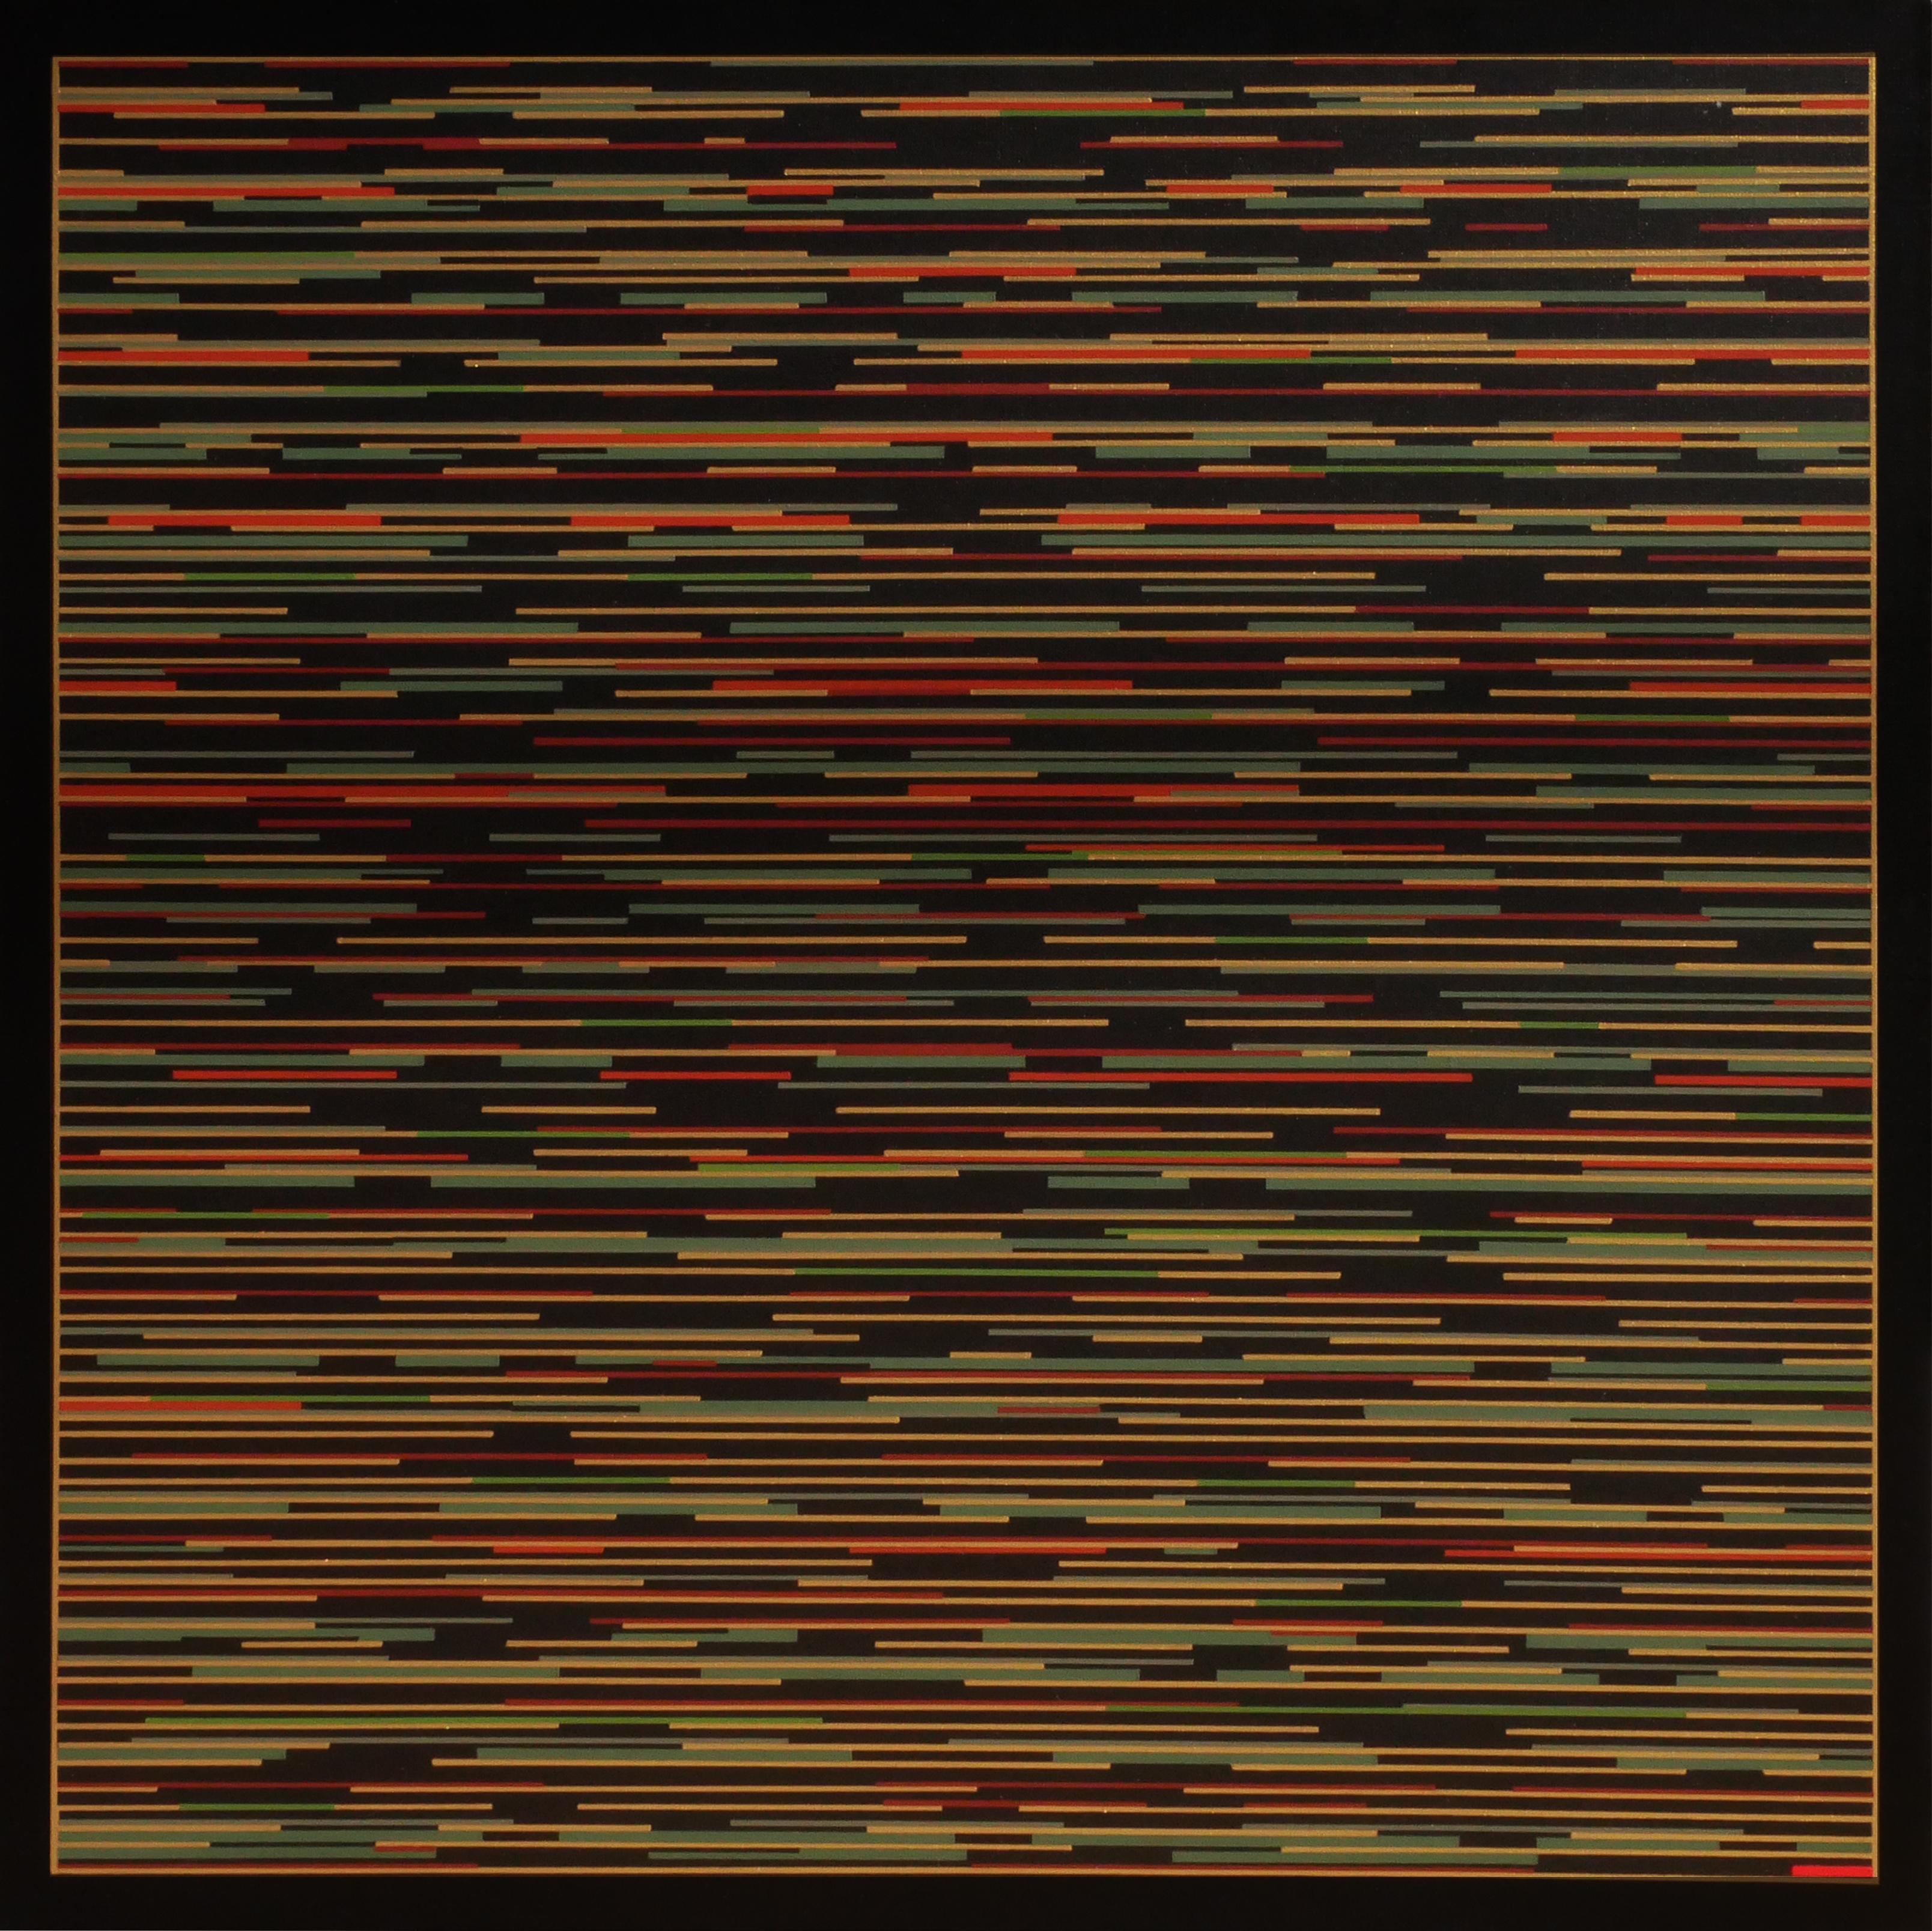 Contemporary abstract geometric painting by artist Mark Byckowski. The work is featured in a series of paintings. The work features horizontal lines with a variety of vivid colors of yellow, red, and green against a black background. Each work in